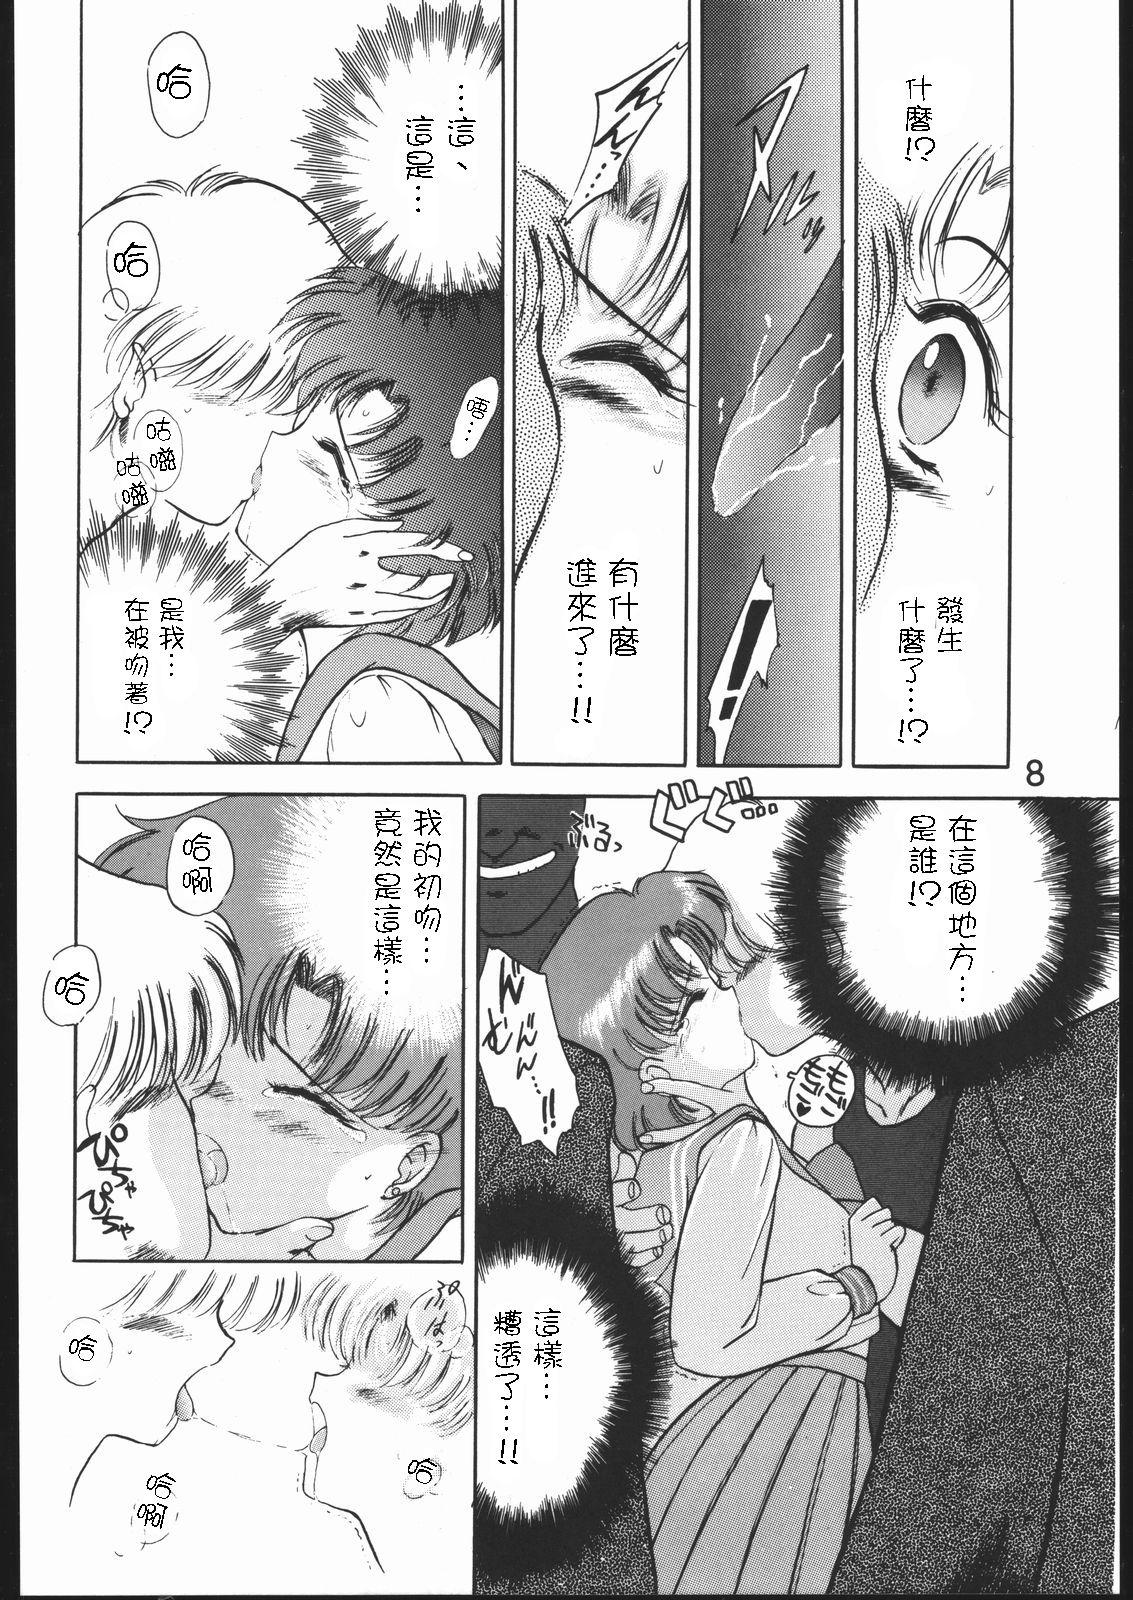 Orgy SUBMISSION MERCURY PLUS - Sailor moon Fist - Page 8